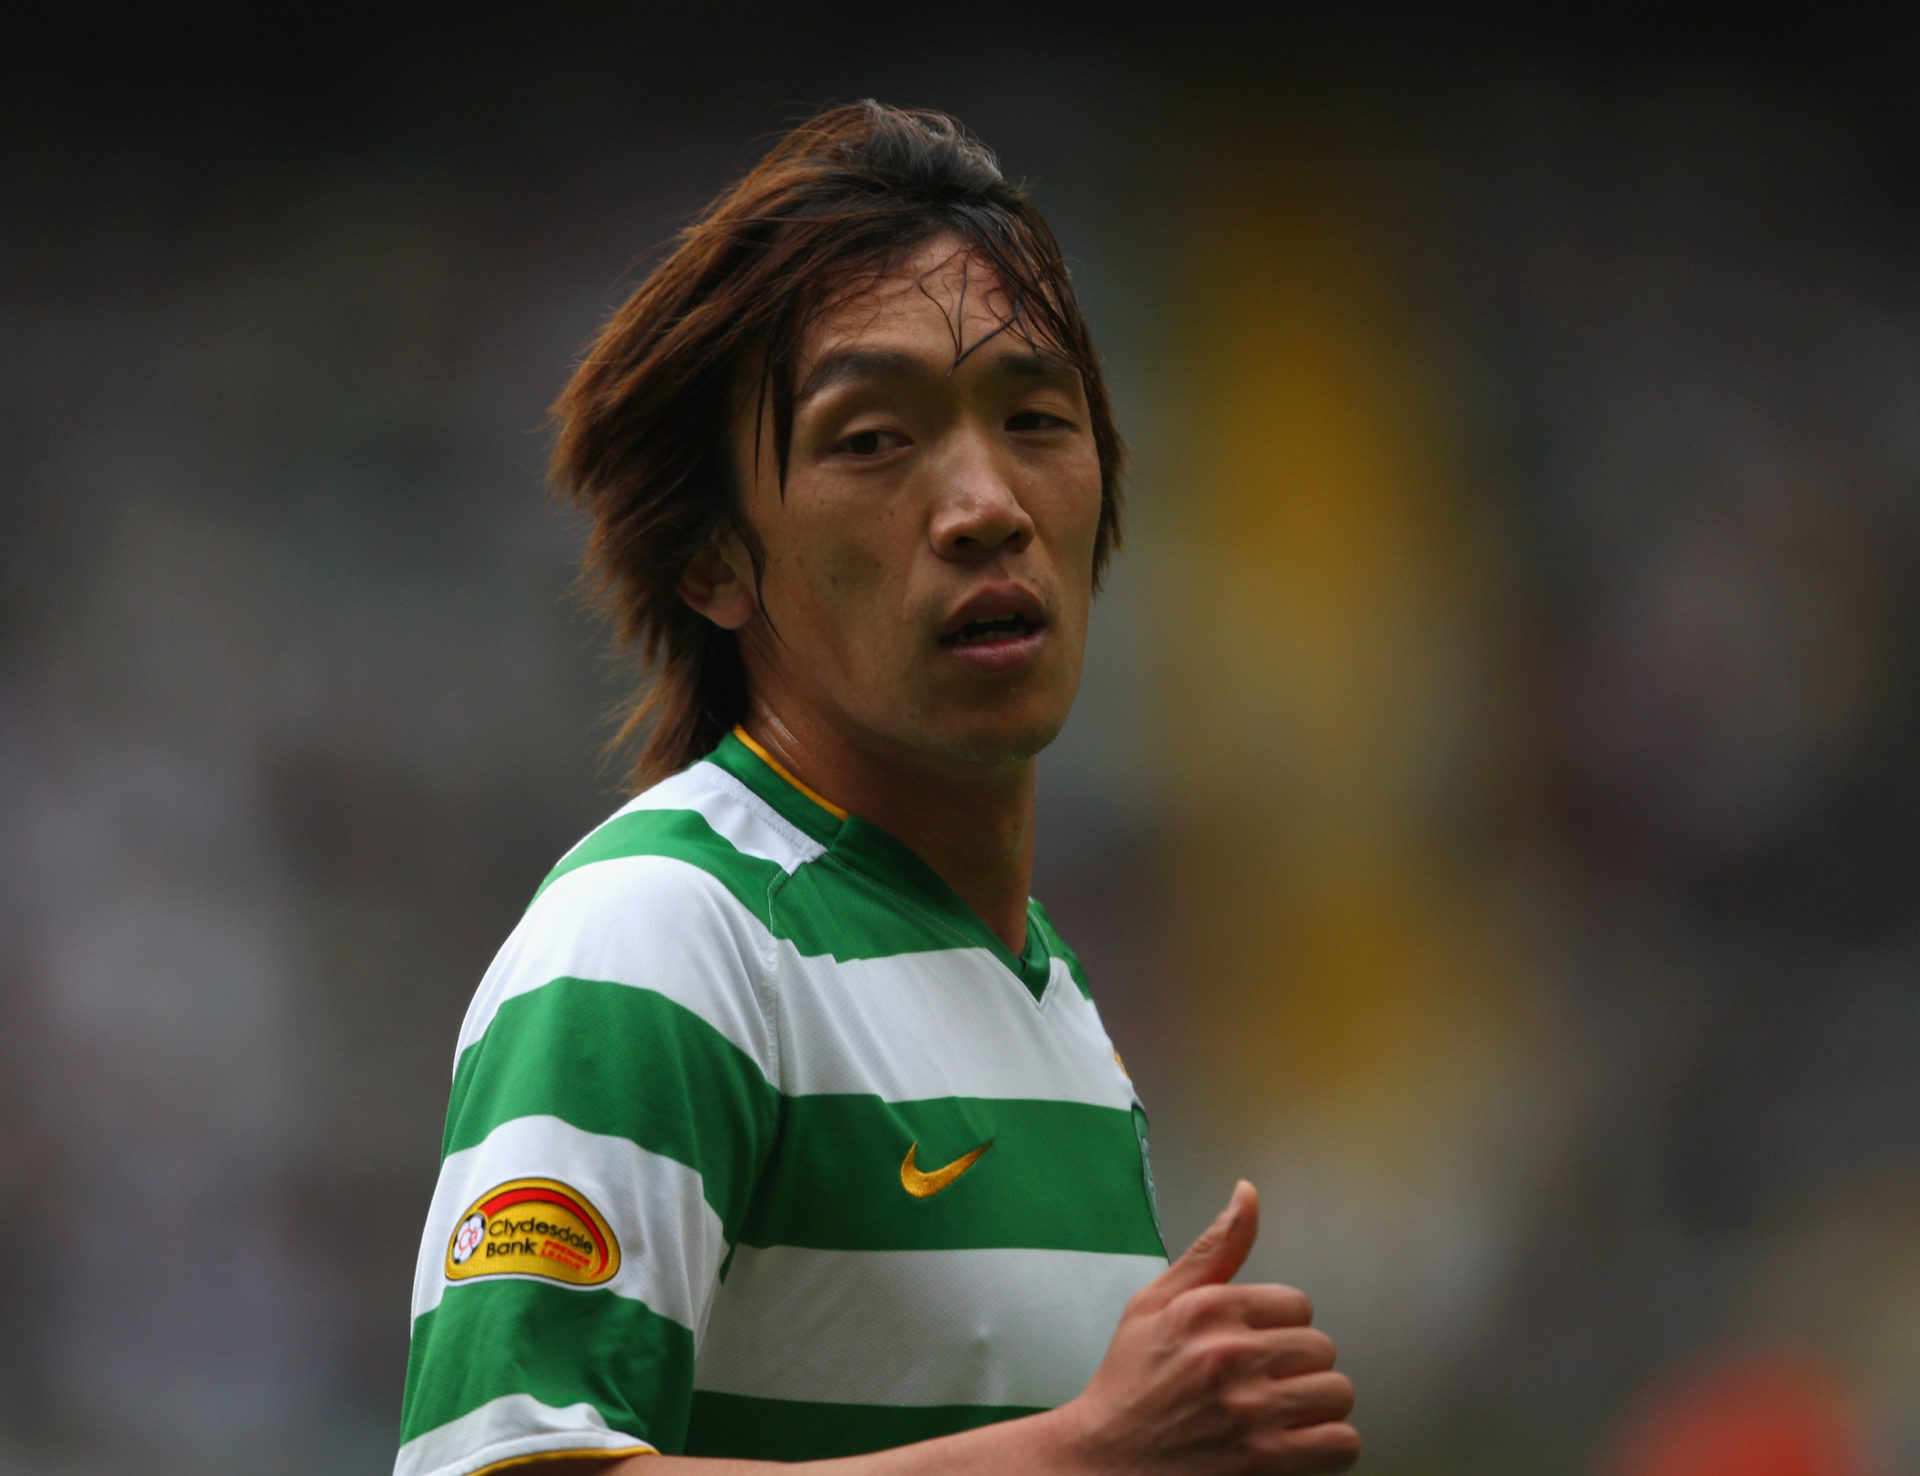 Everything Celtic on X: 🇯🇵  Shunsuke Nakamura Former Celtic midfielder Shunsuke  Nakamura will incredibly be continuing his career at the age of of 44. The  Japanese hero has just signed a